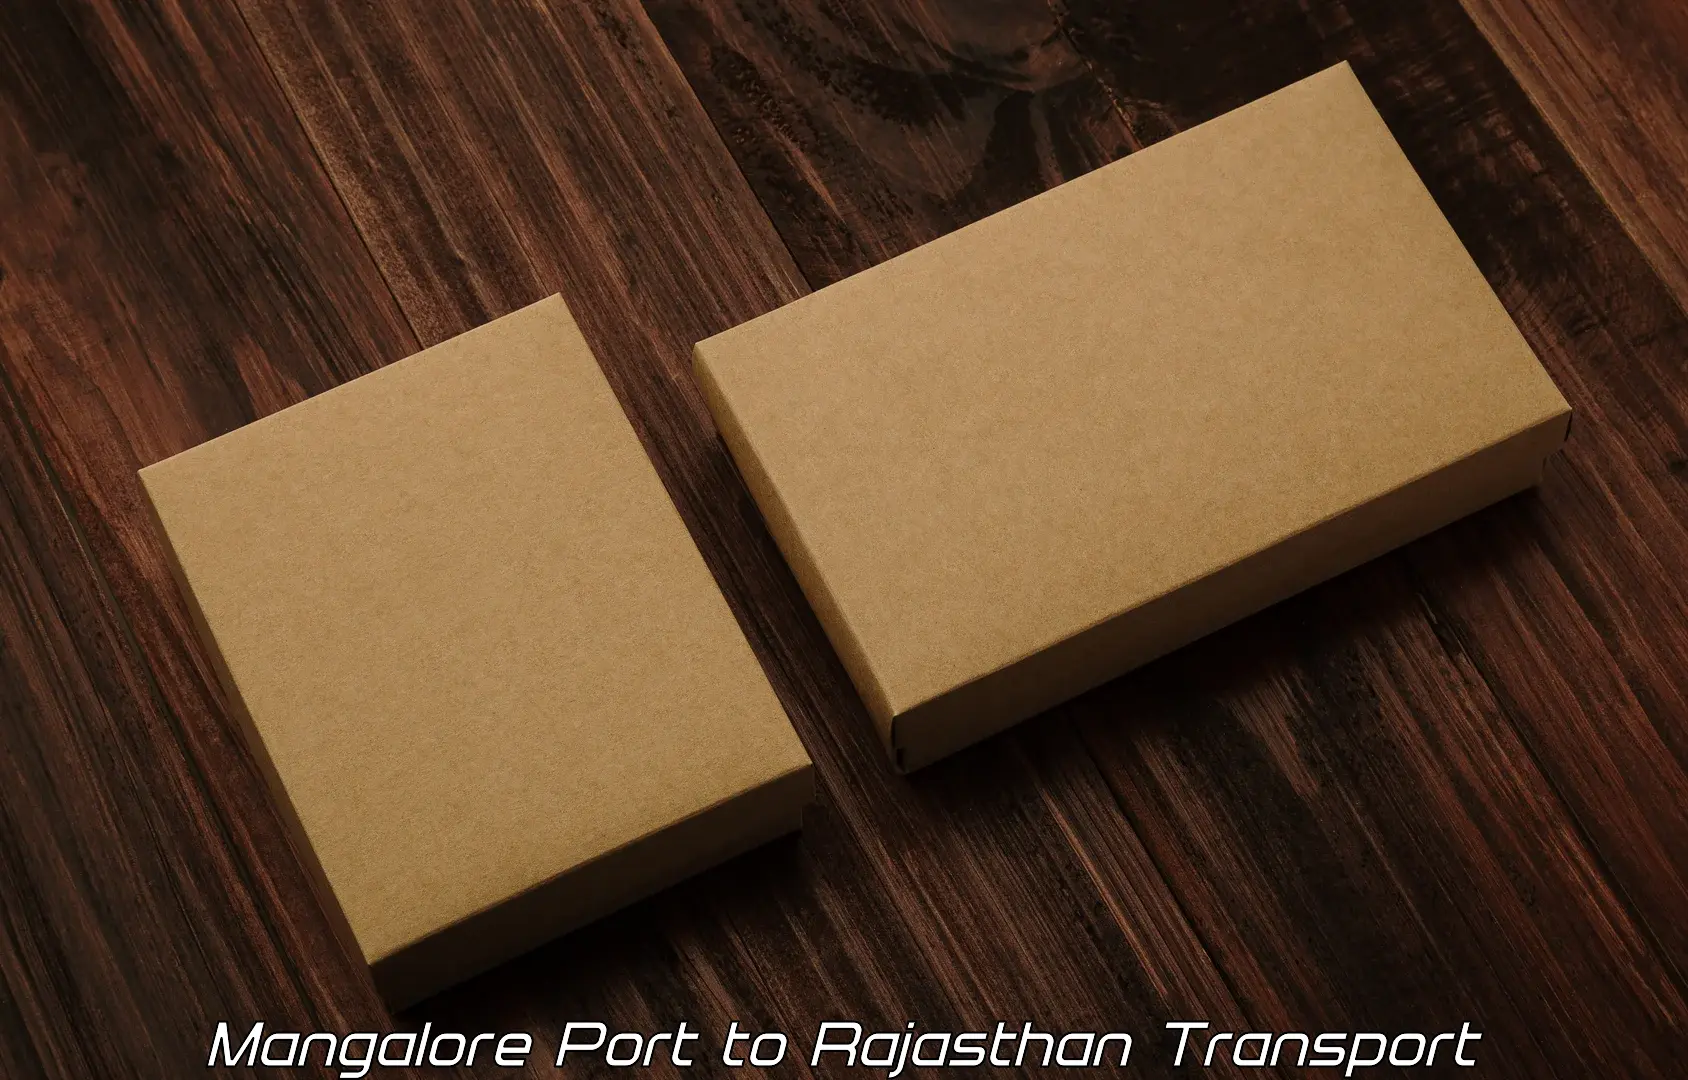 Transport shared services in Mangalore Port to Rawatbhata